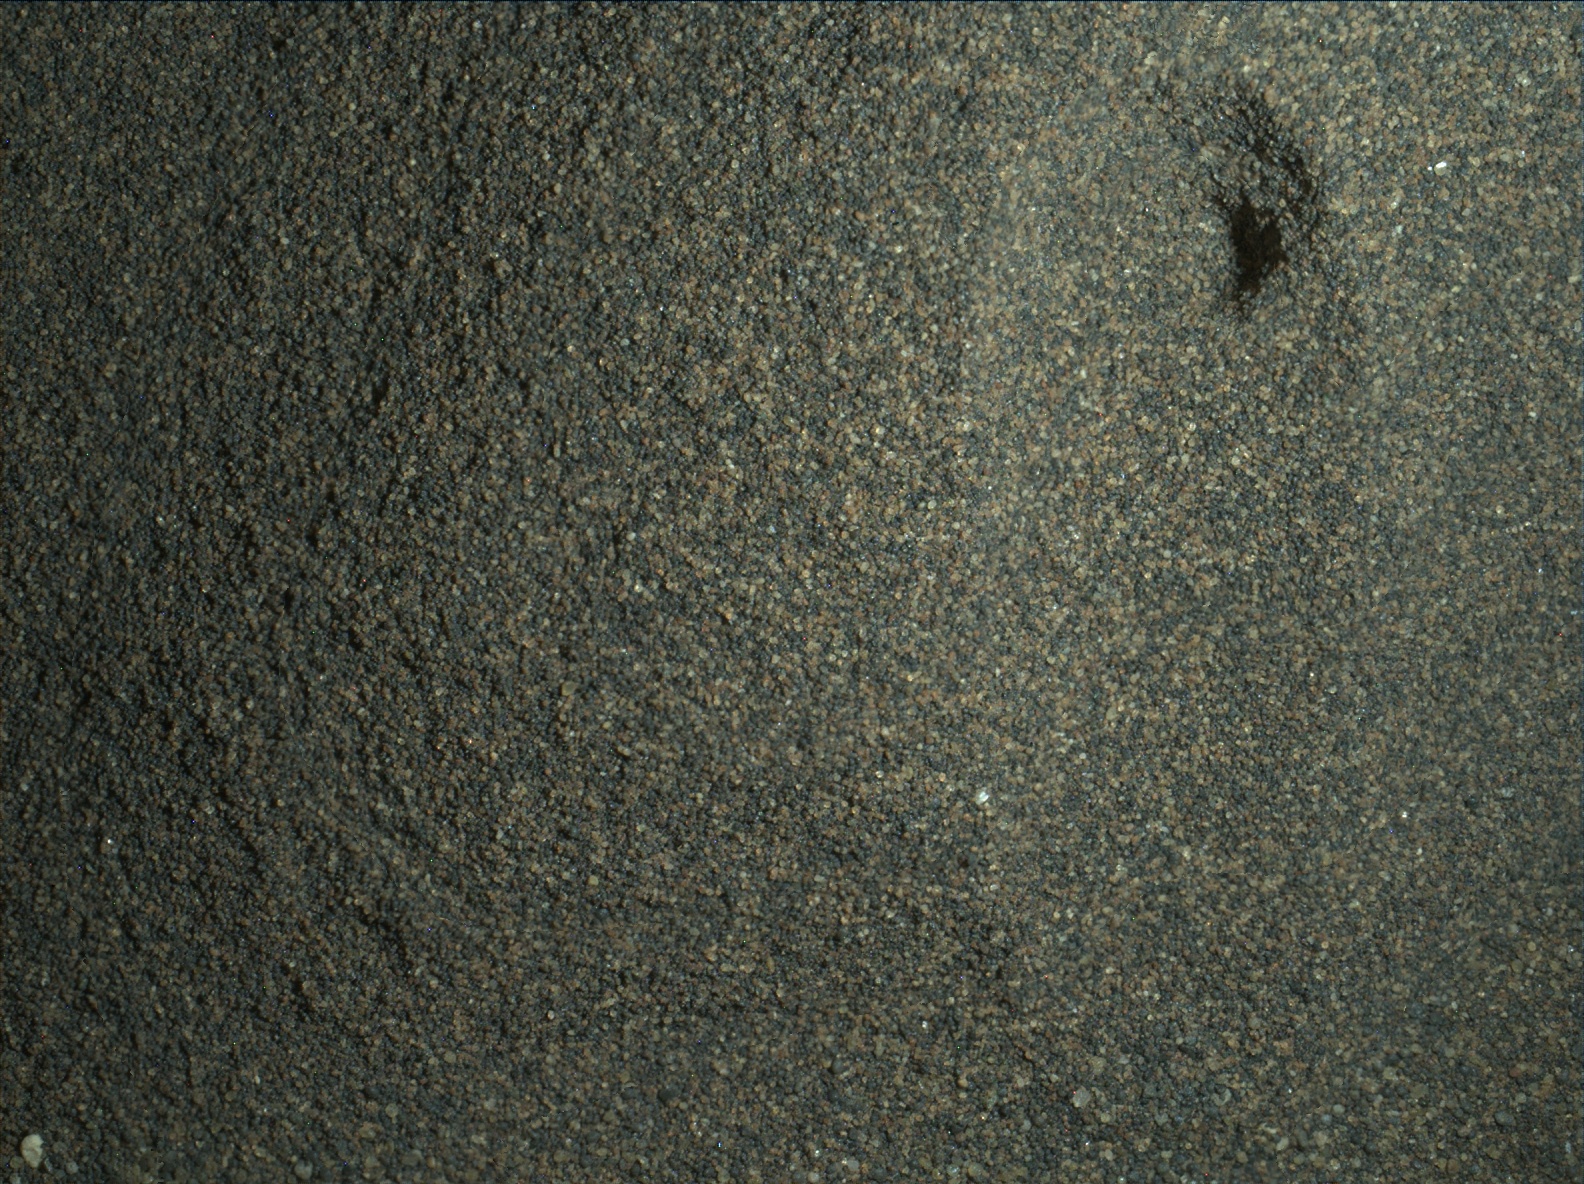 Nasa's Mars rover Curiosity acquired this image using its Mars Hand Lens Imager (MAHLI) on Sol 1234